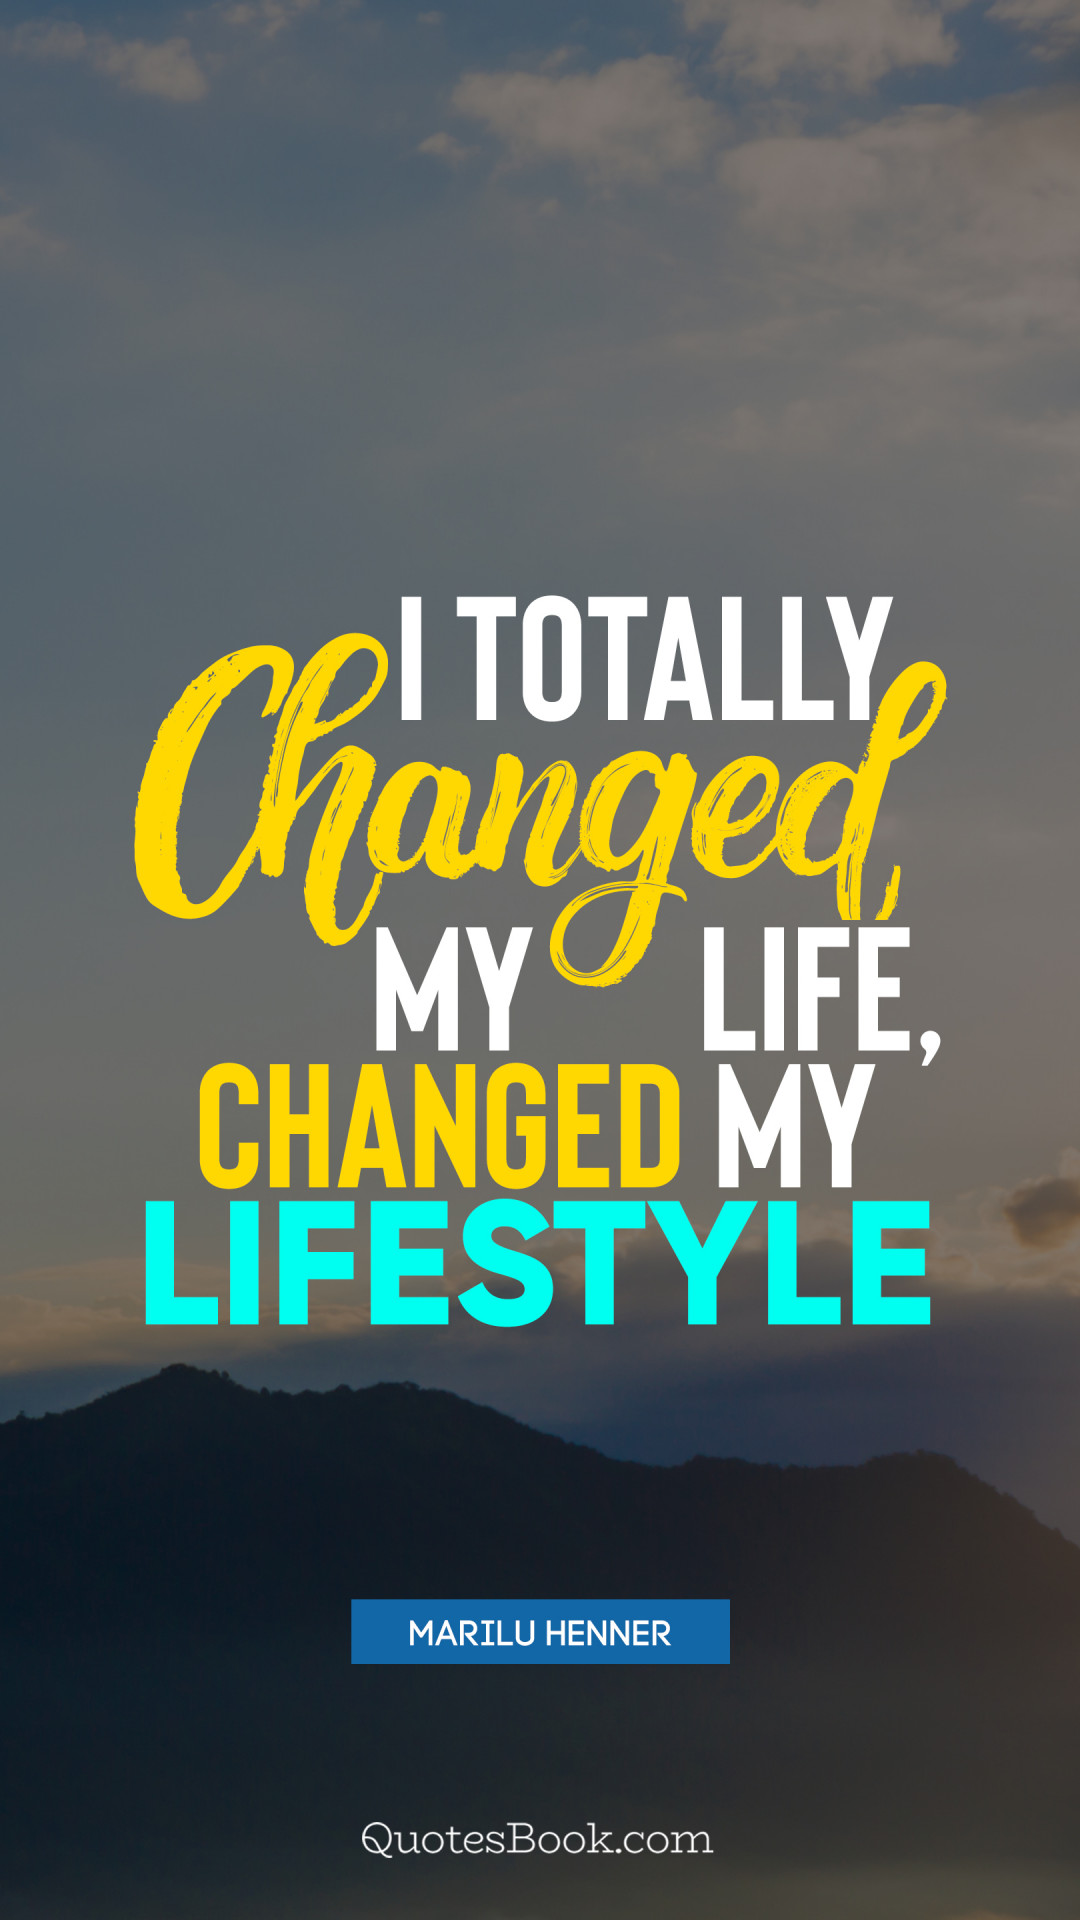 I totally changed my life, changed my lifestyle. - Quote by Marilu